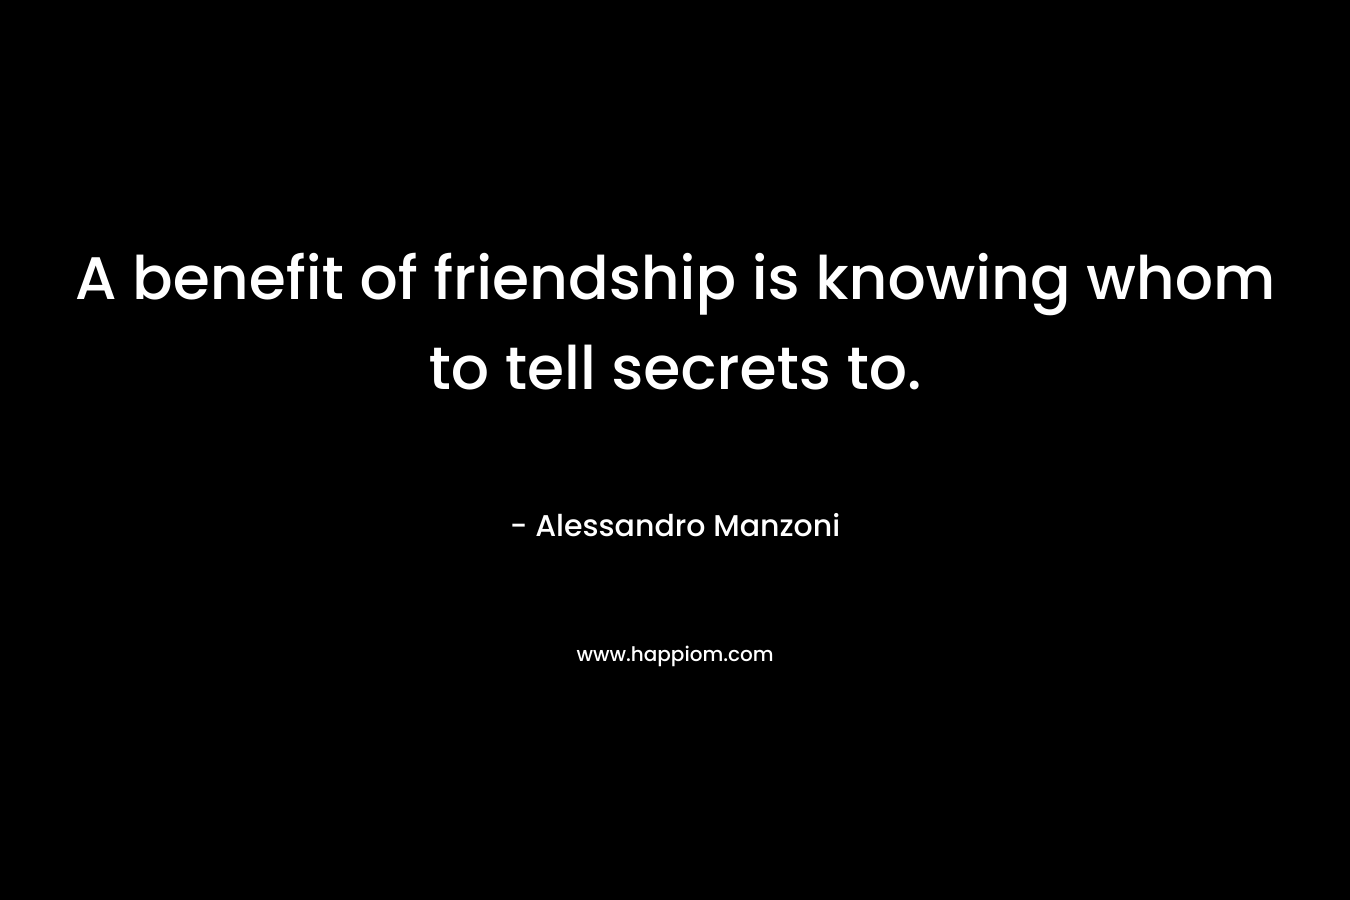 A benefit of friendship is knowing whom to tell secrets to. – Alessandro Manzoni